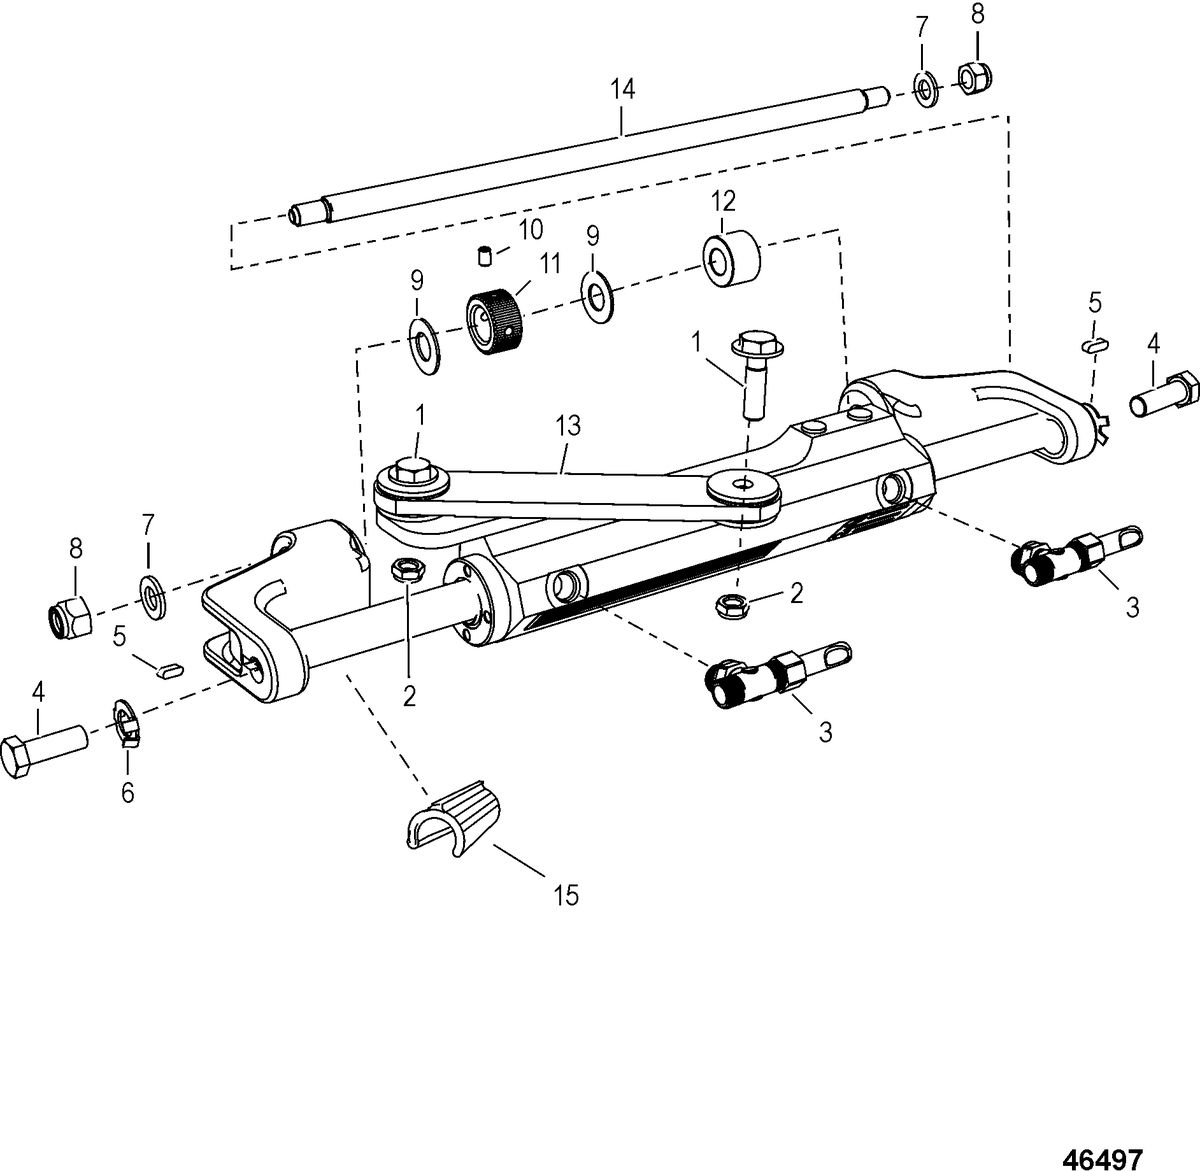 ACCESSORIES STEERING SYSTEMS AND COMPONENTS Steering Actuator Assembly(8M0050097)